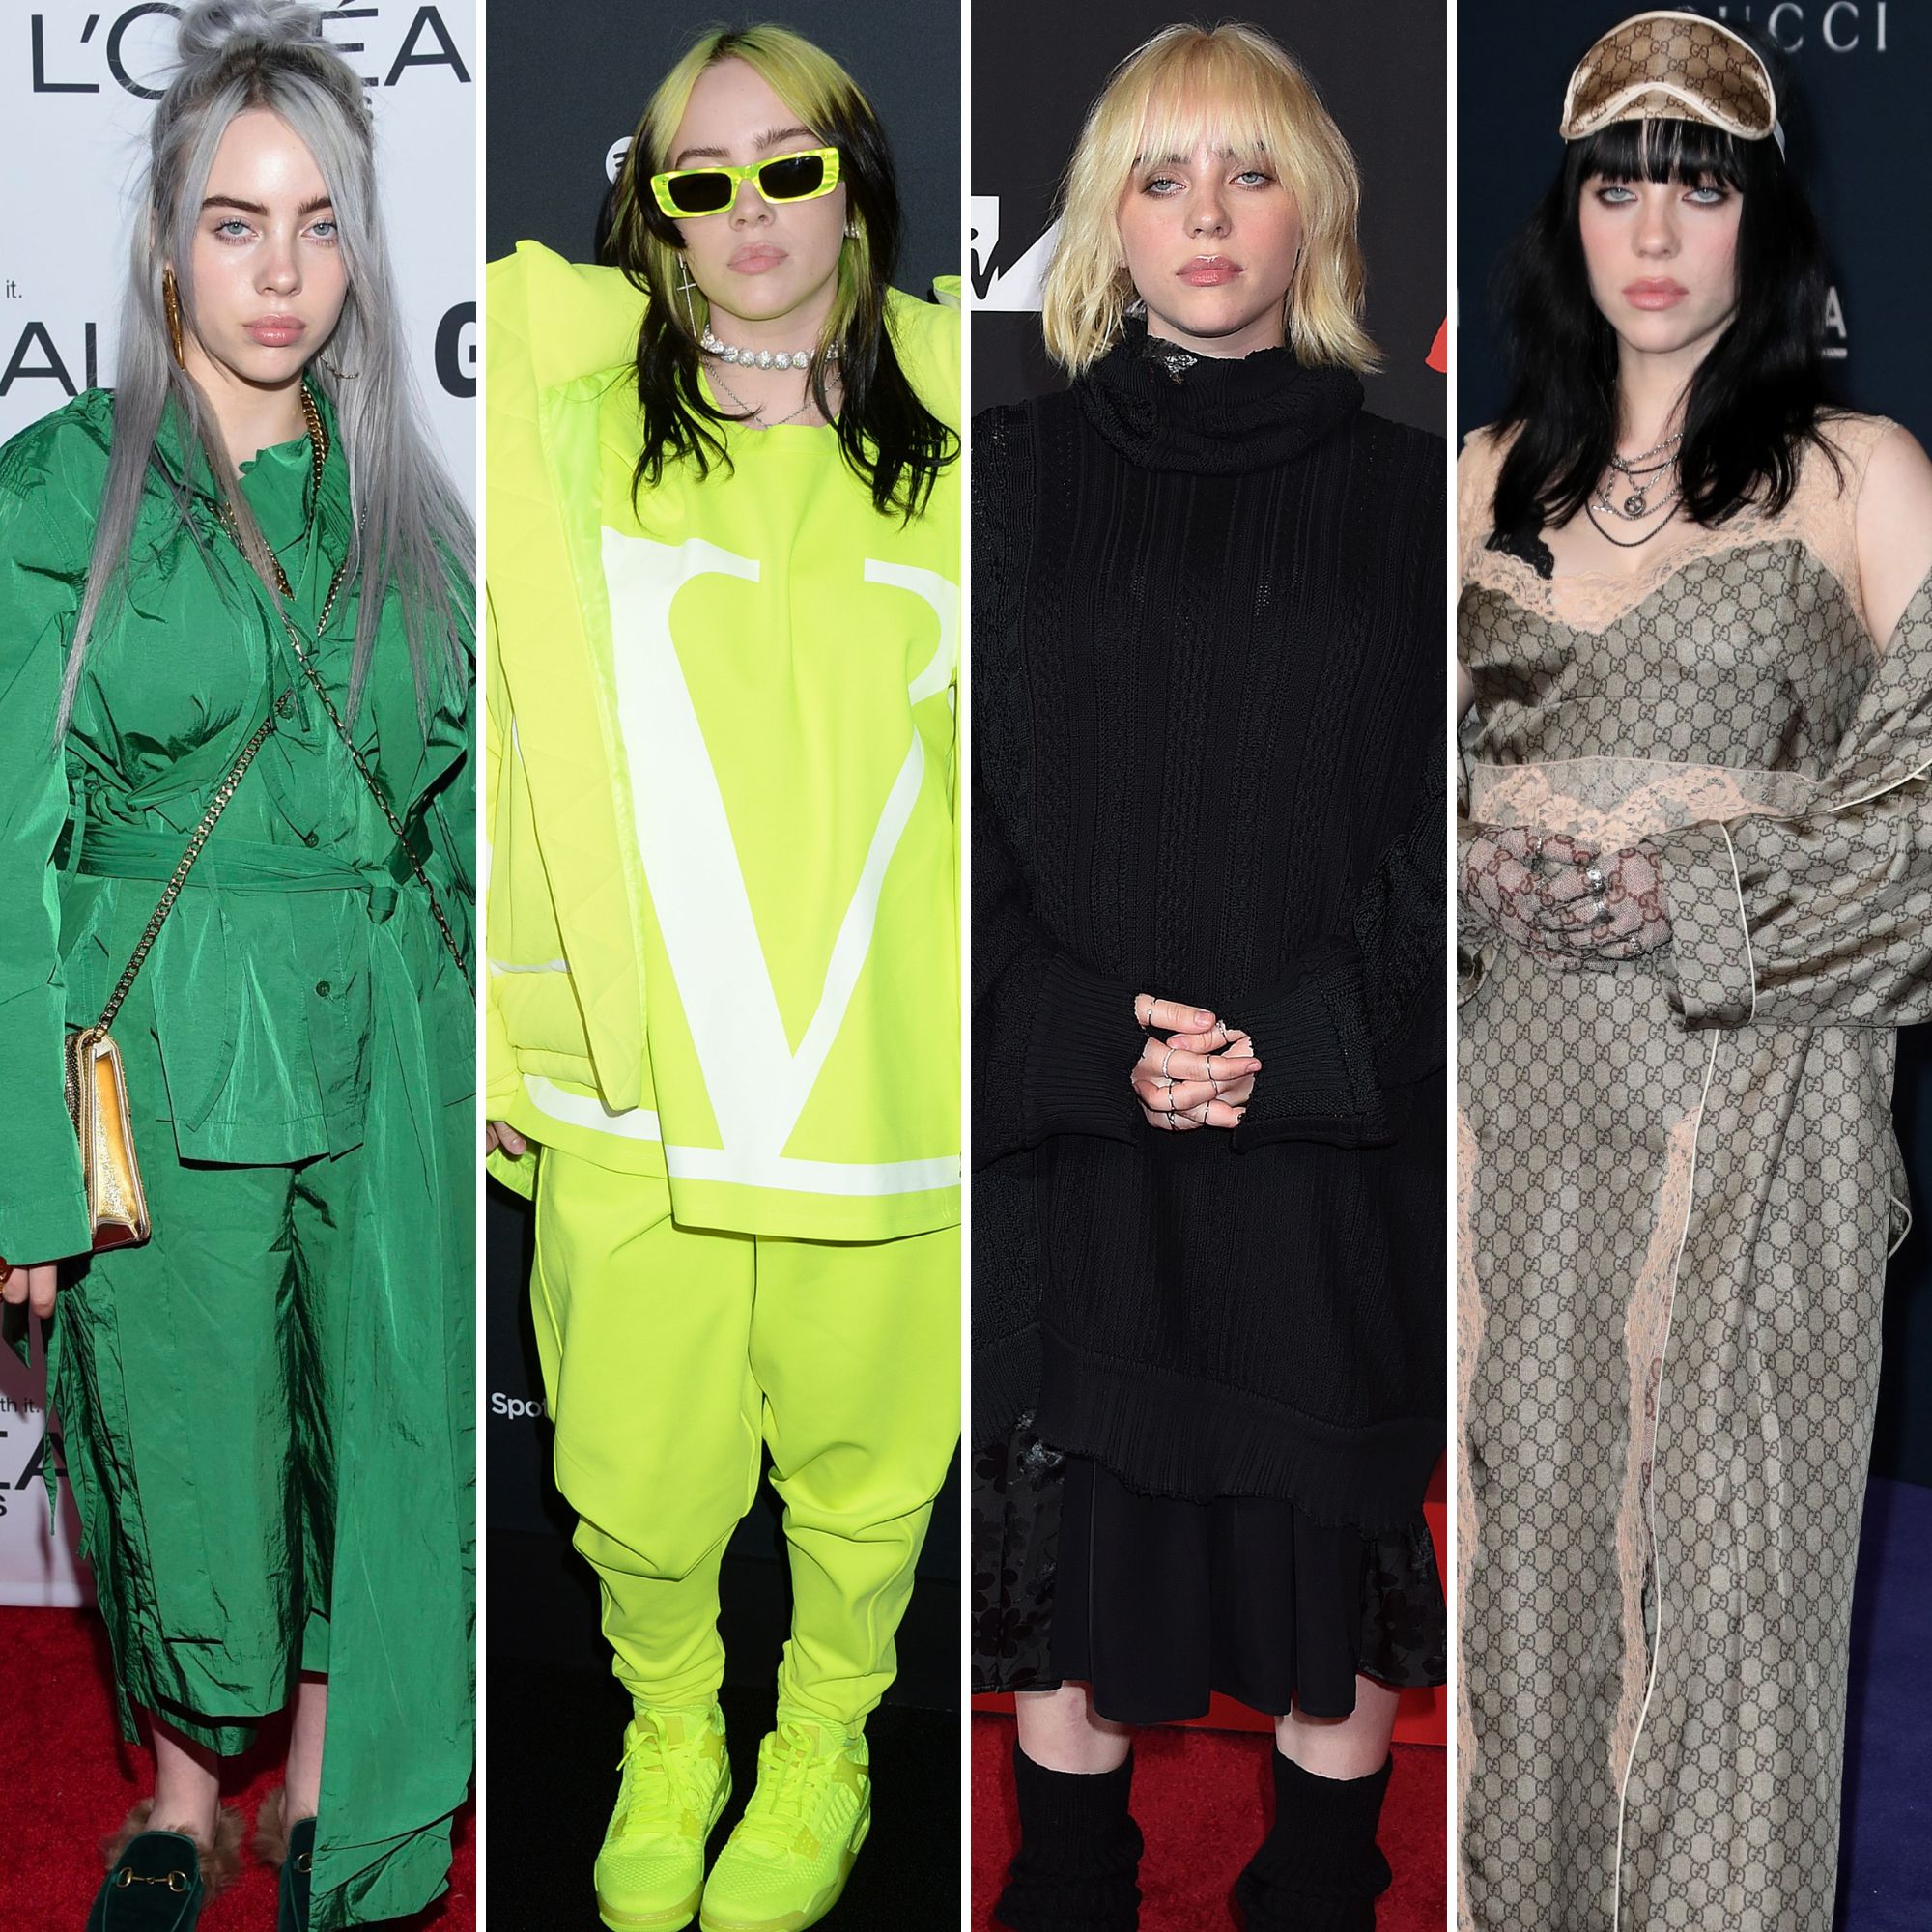 Billie Eilish Likes When Her Outfits Make 'Heads Look Up' (Exclusive)